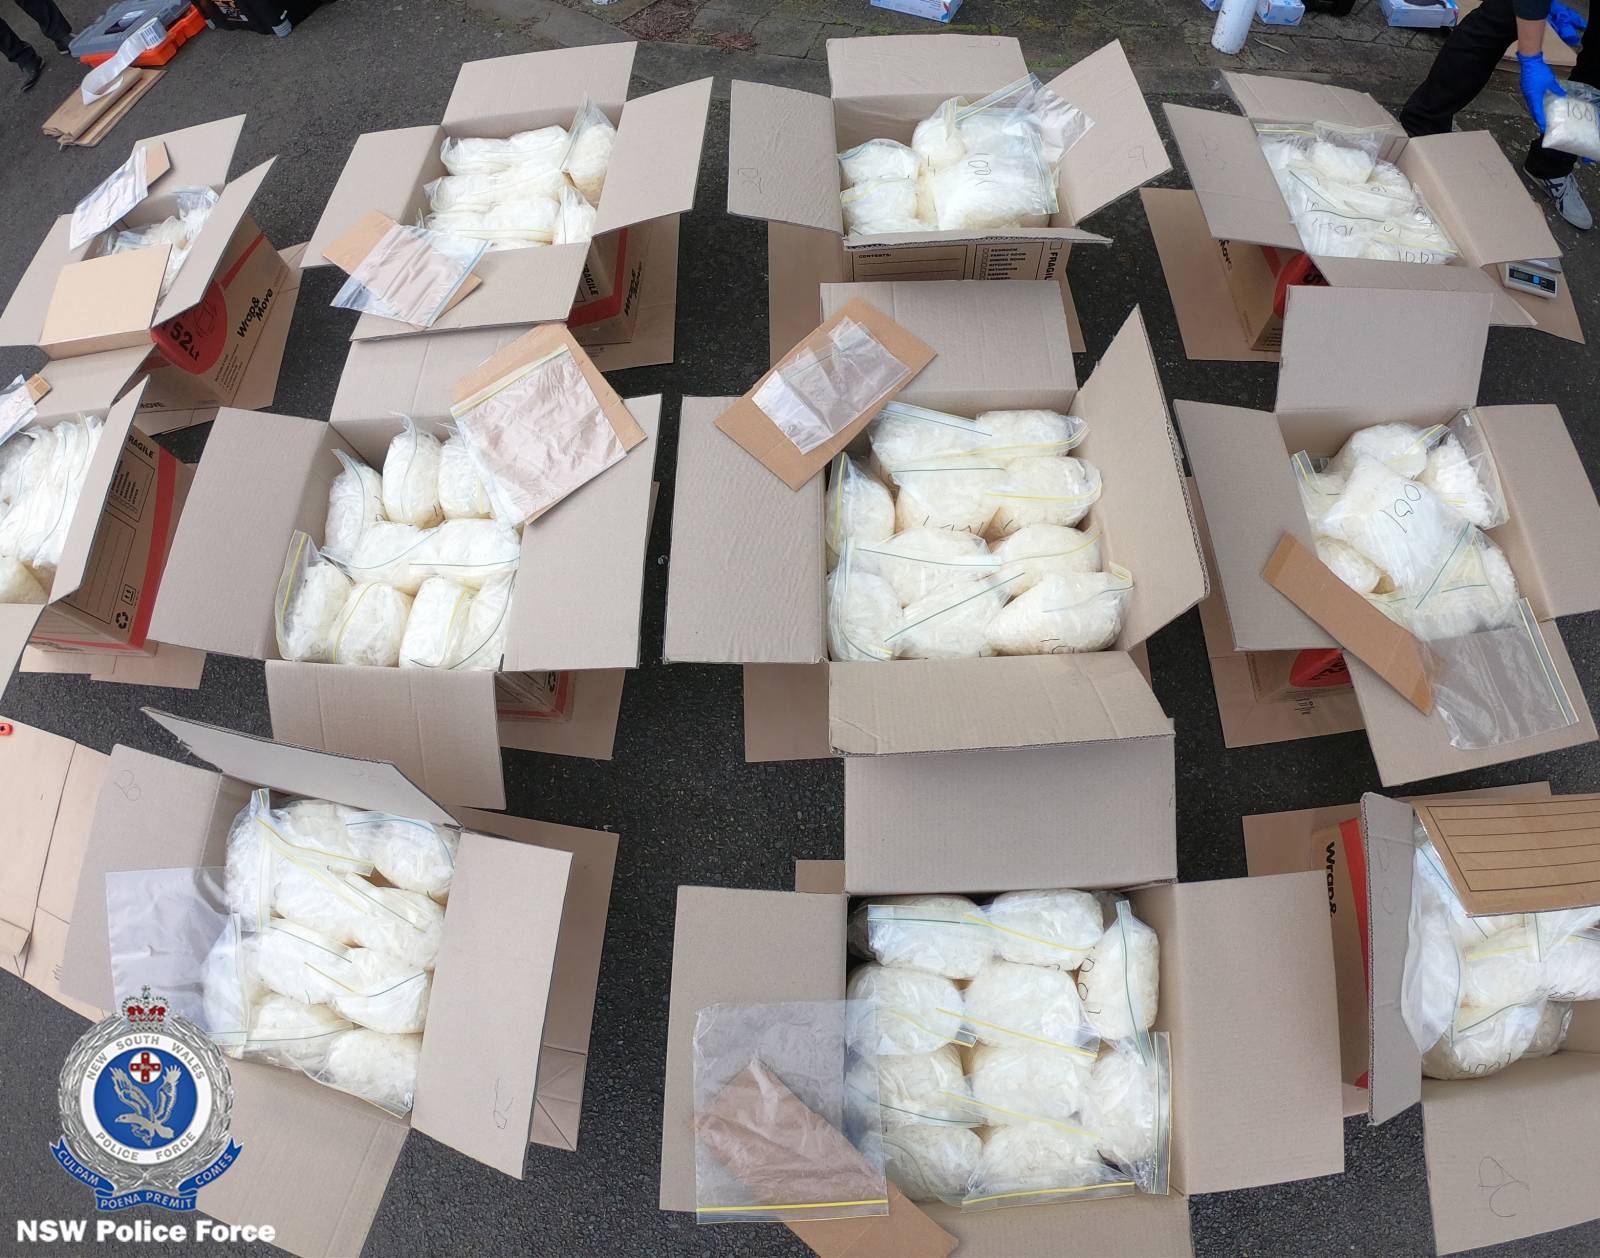 Part of the 273kg methamphetamines seized from a van after it hit a police patrol car parked outside a police station in Eastwood